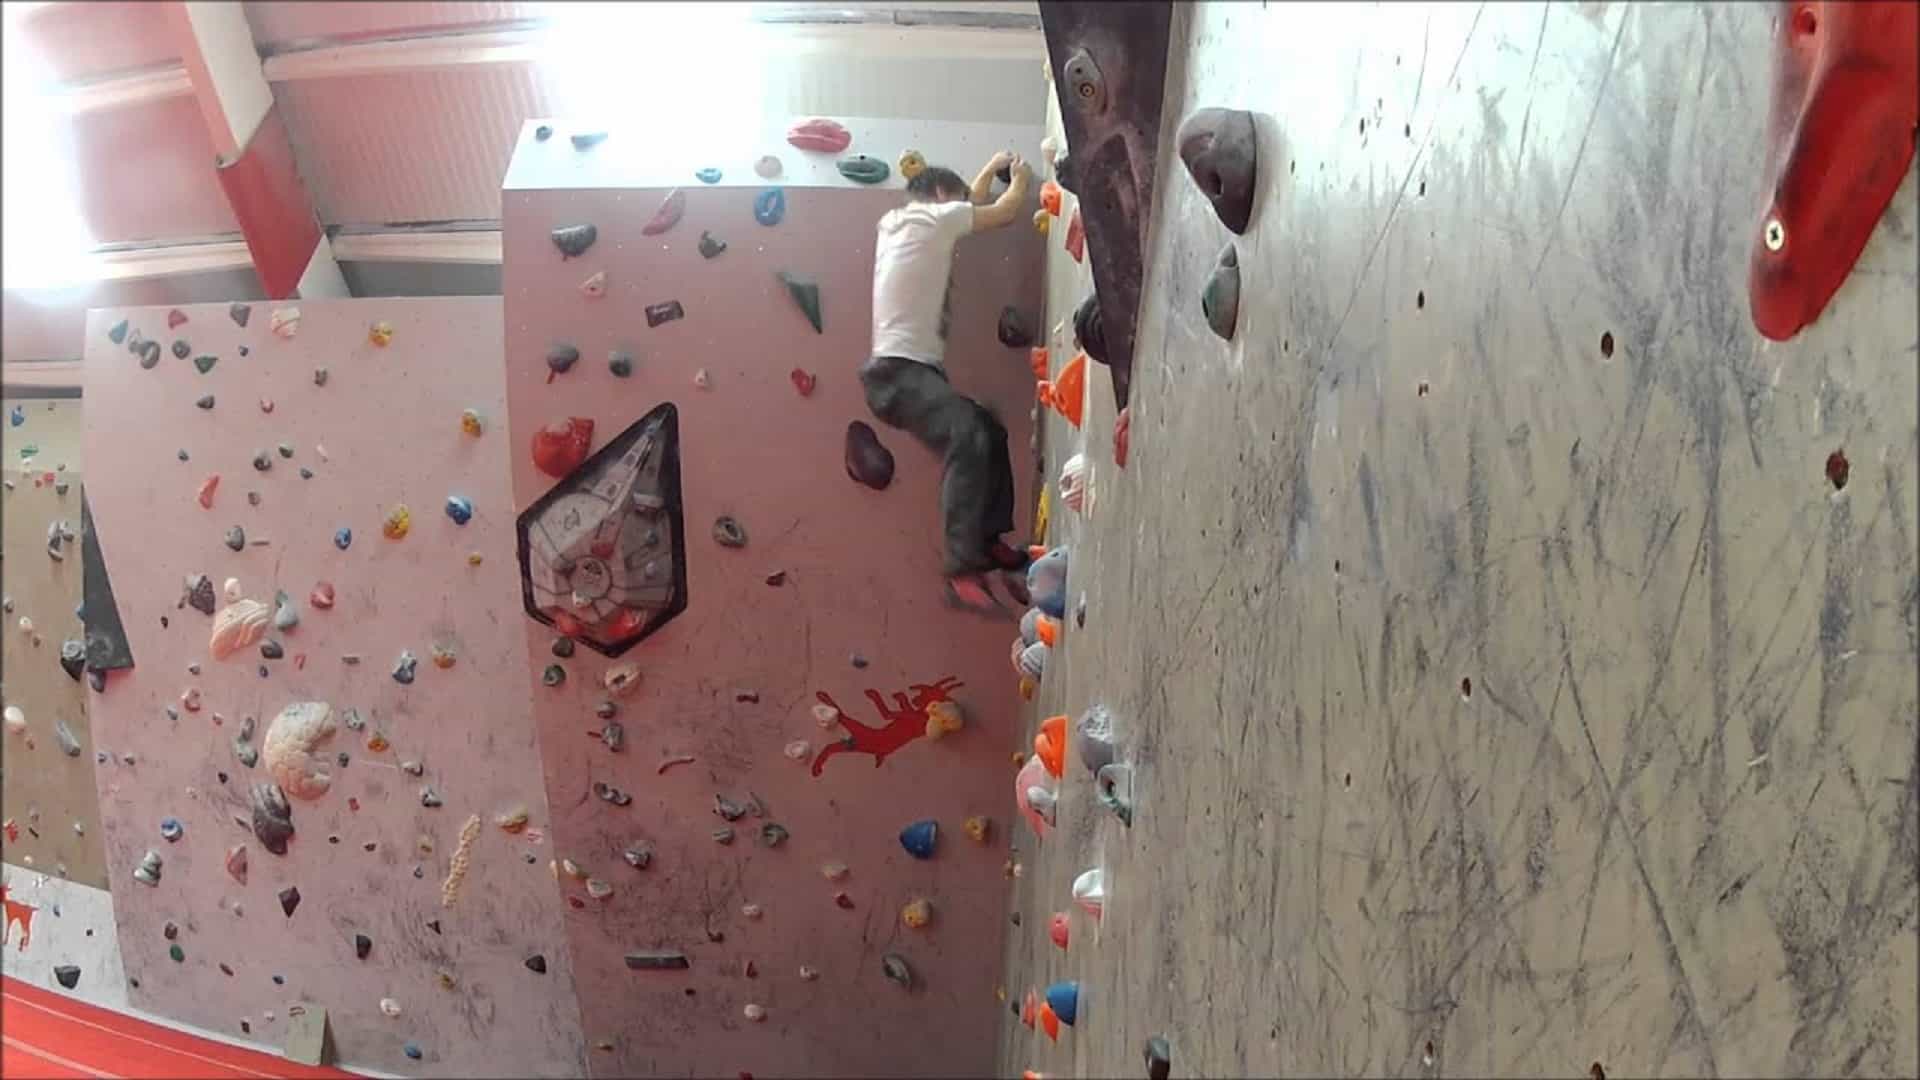 The Red Goat Climbing Wall in UK